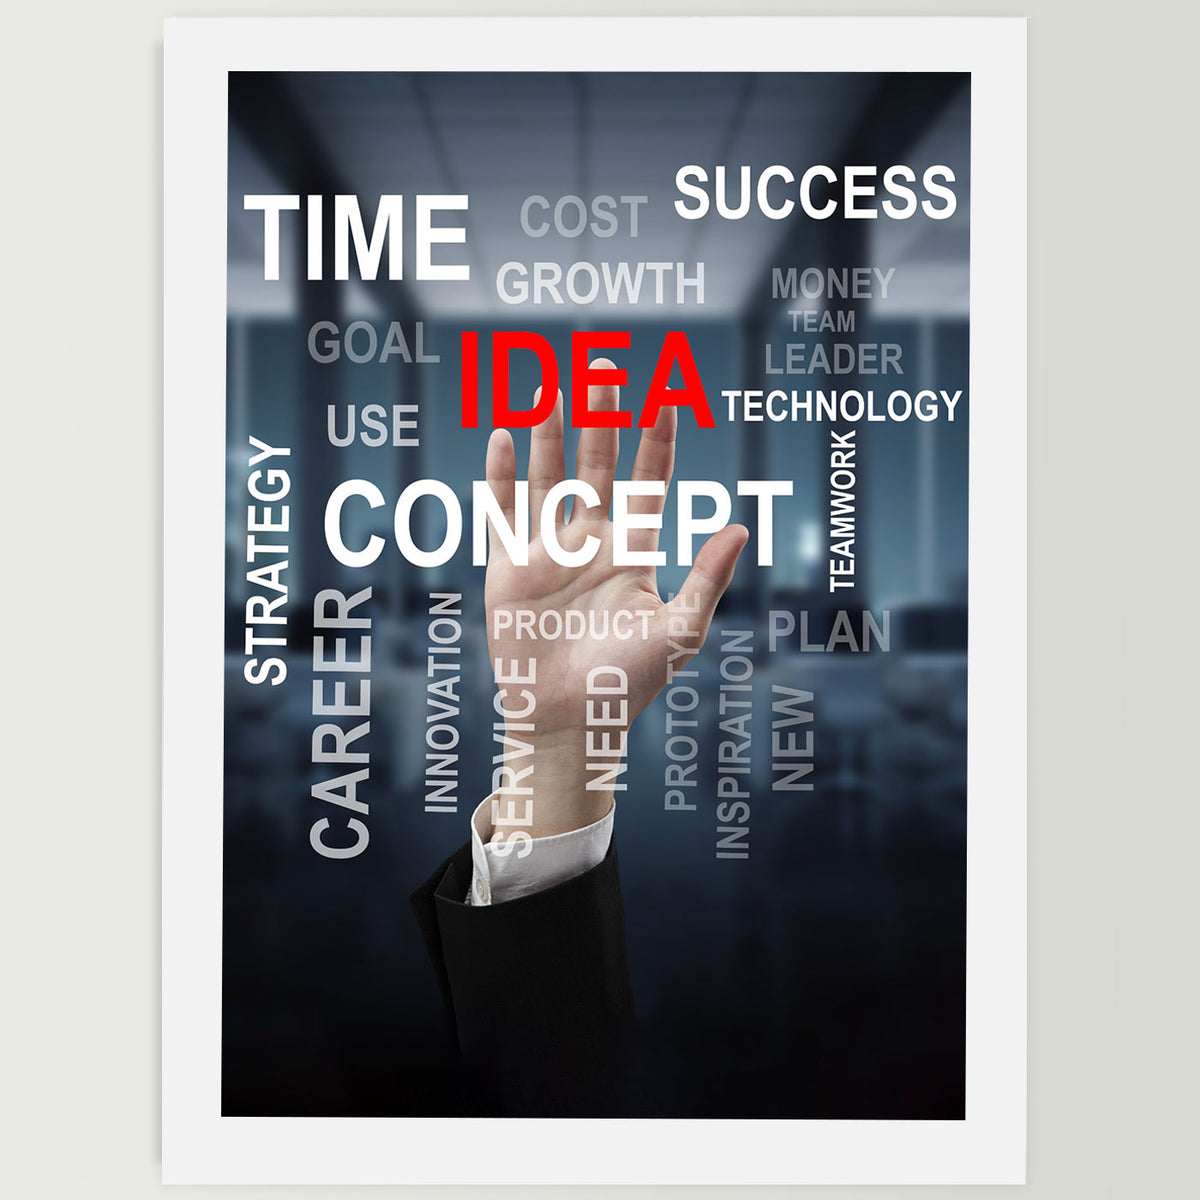 Time Idea Concept Wall Frame For Home Decor,Living Room, Study Room, Office Decor